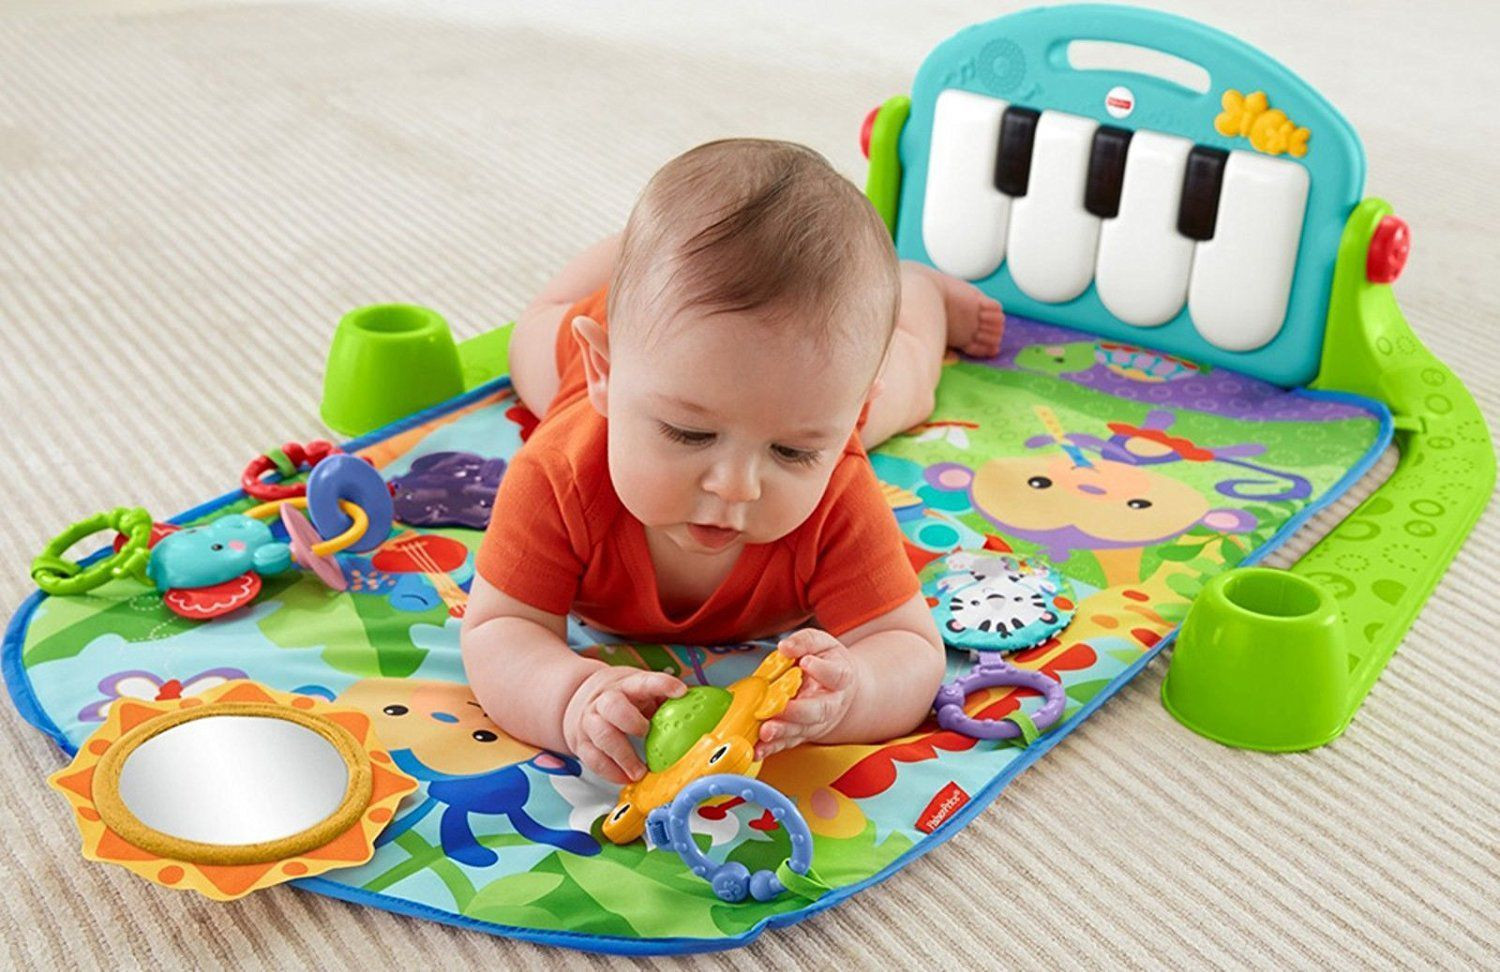 Born Baby Gift Ideas
 The 34 Best Baby Gifts of 2020